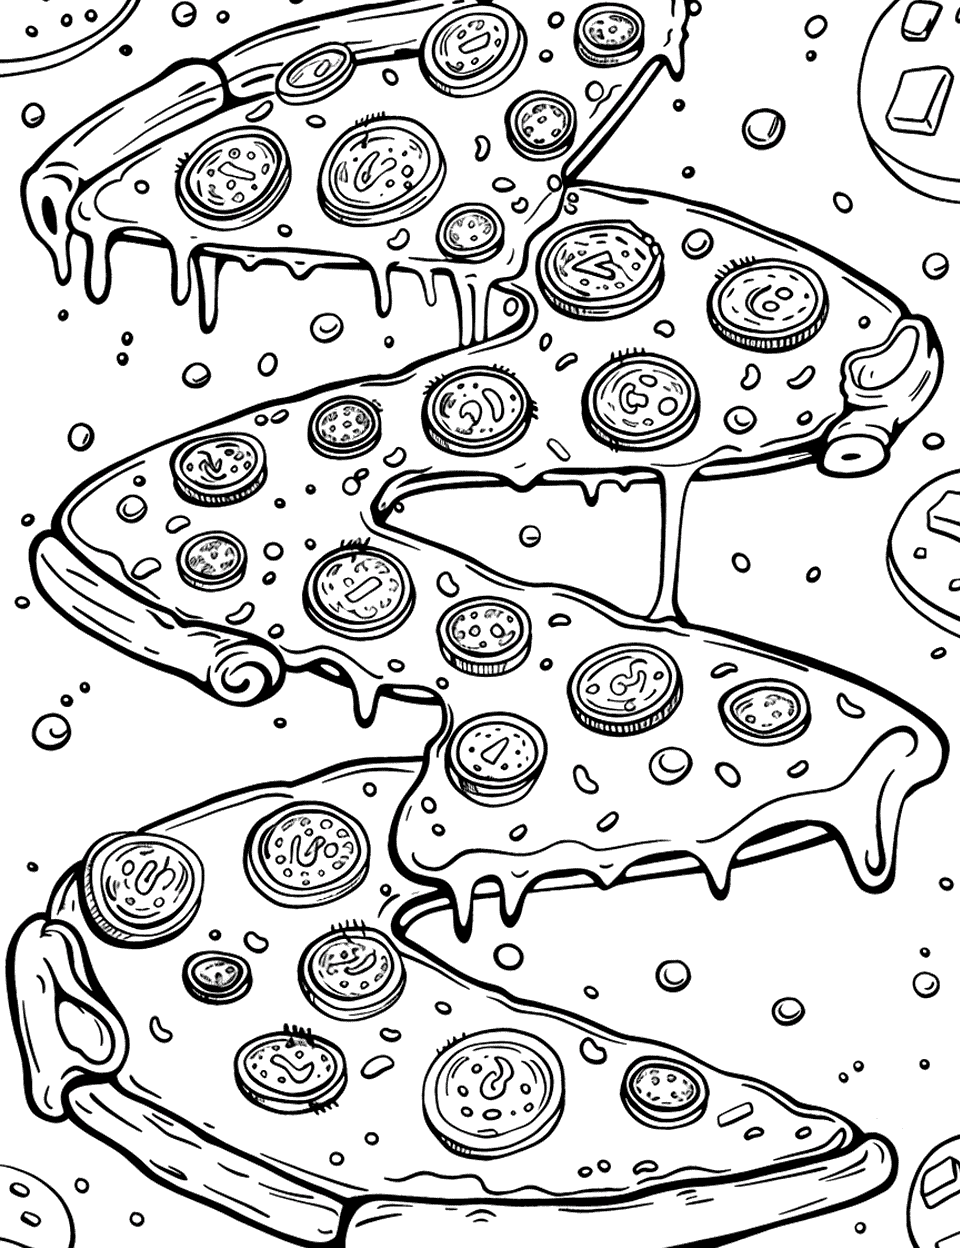 Cheesy Pizza River Coloring Page - A river made of melted cheese with pizza slices.